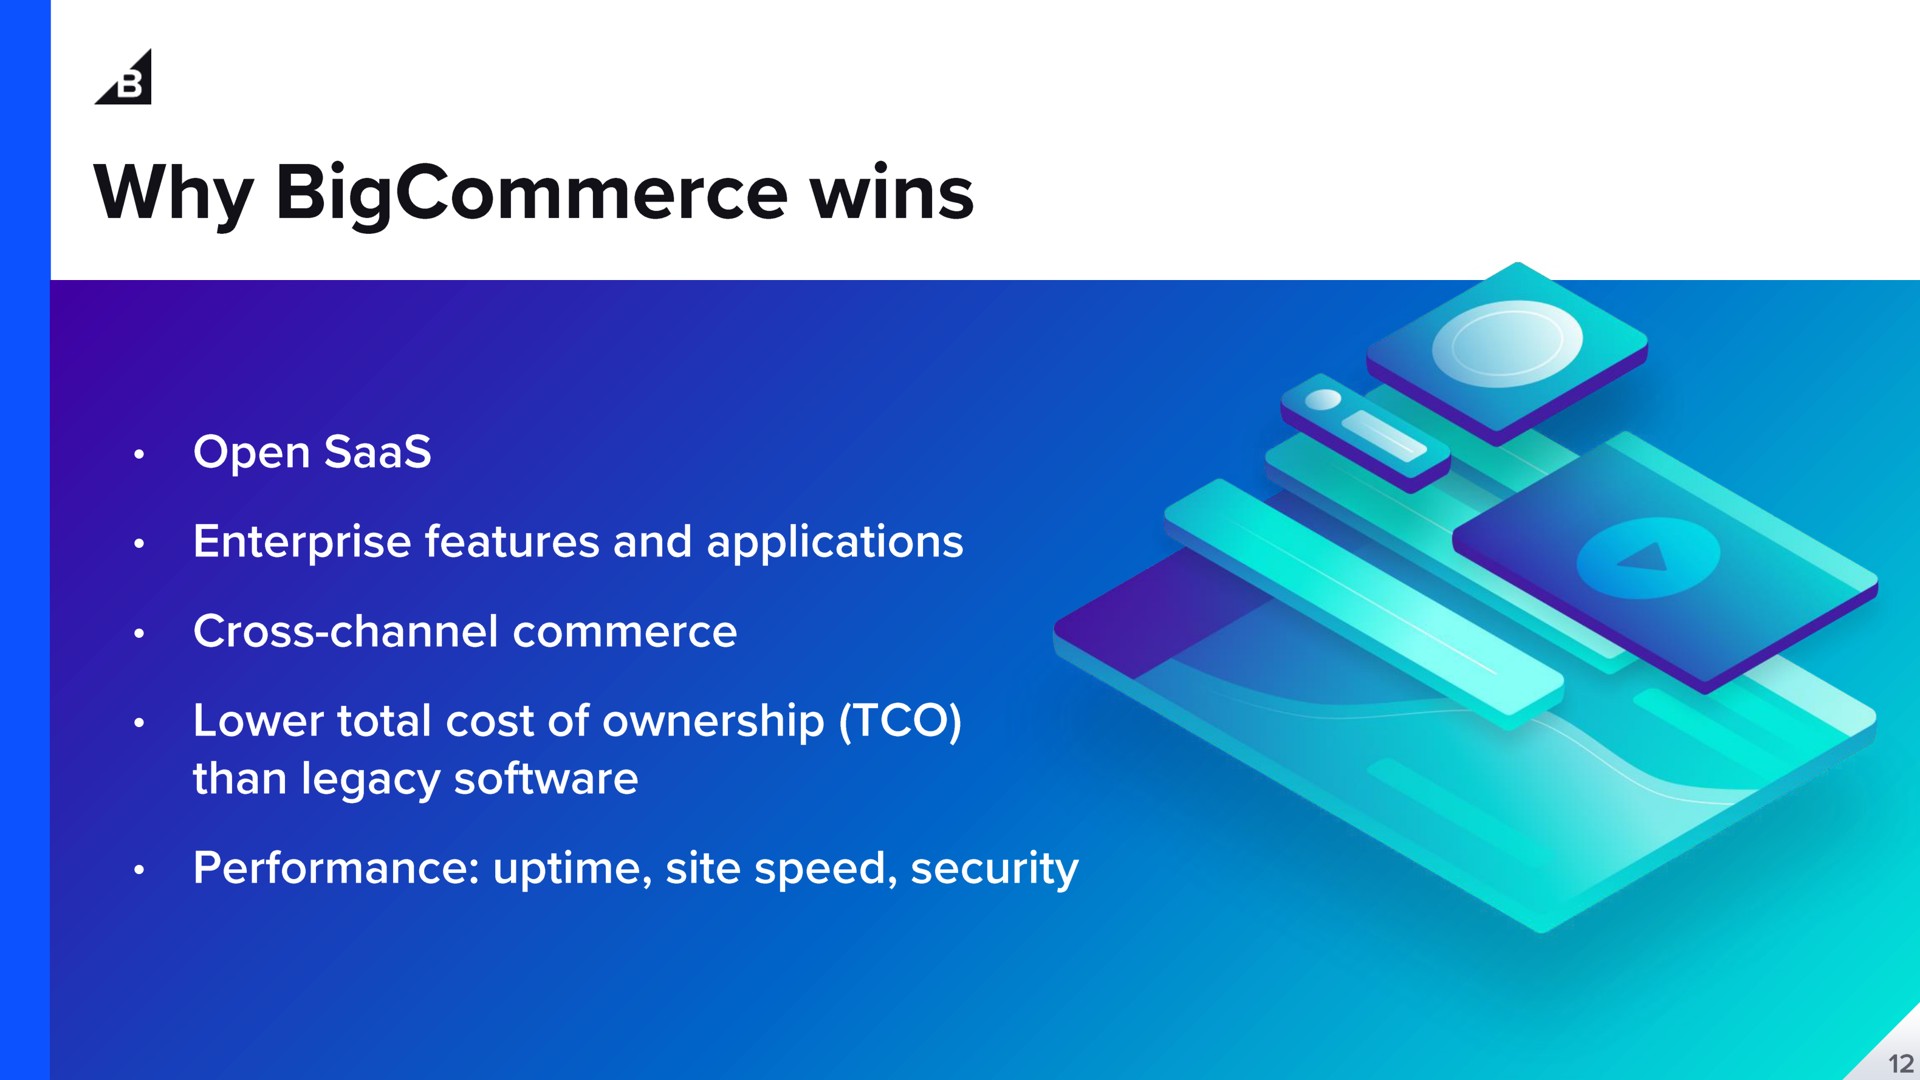 a why wins open enterprise features and applications cross channel commerce lower total cost of ownership than legacy performance site speed security | BigCommerce